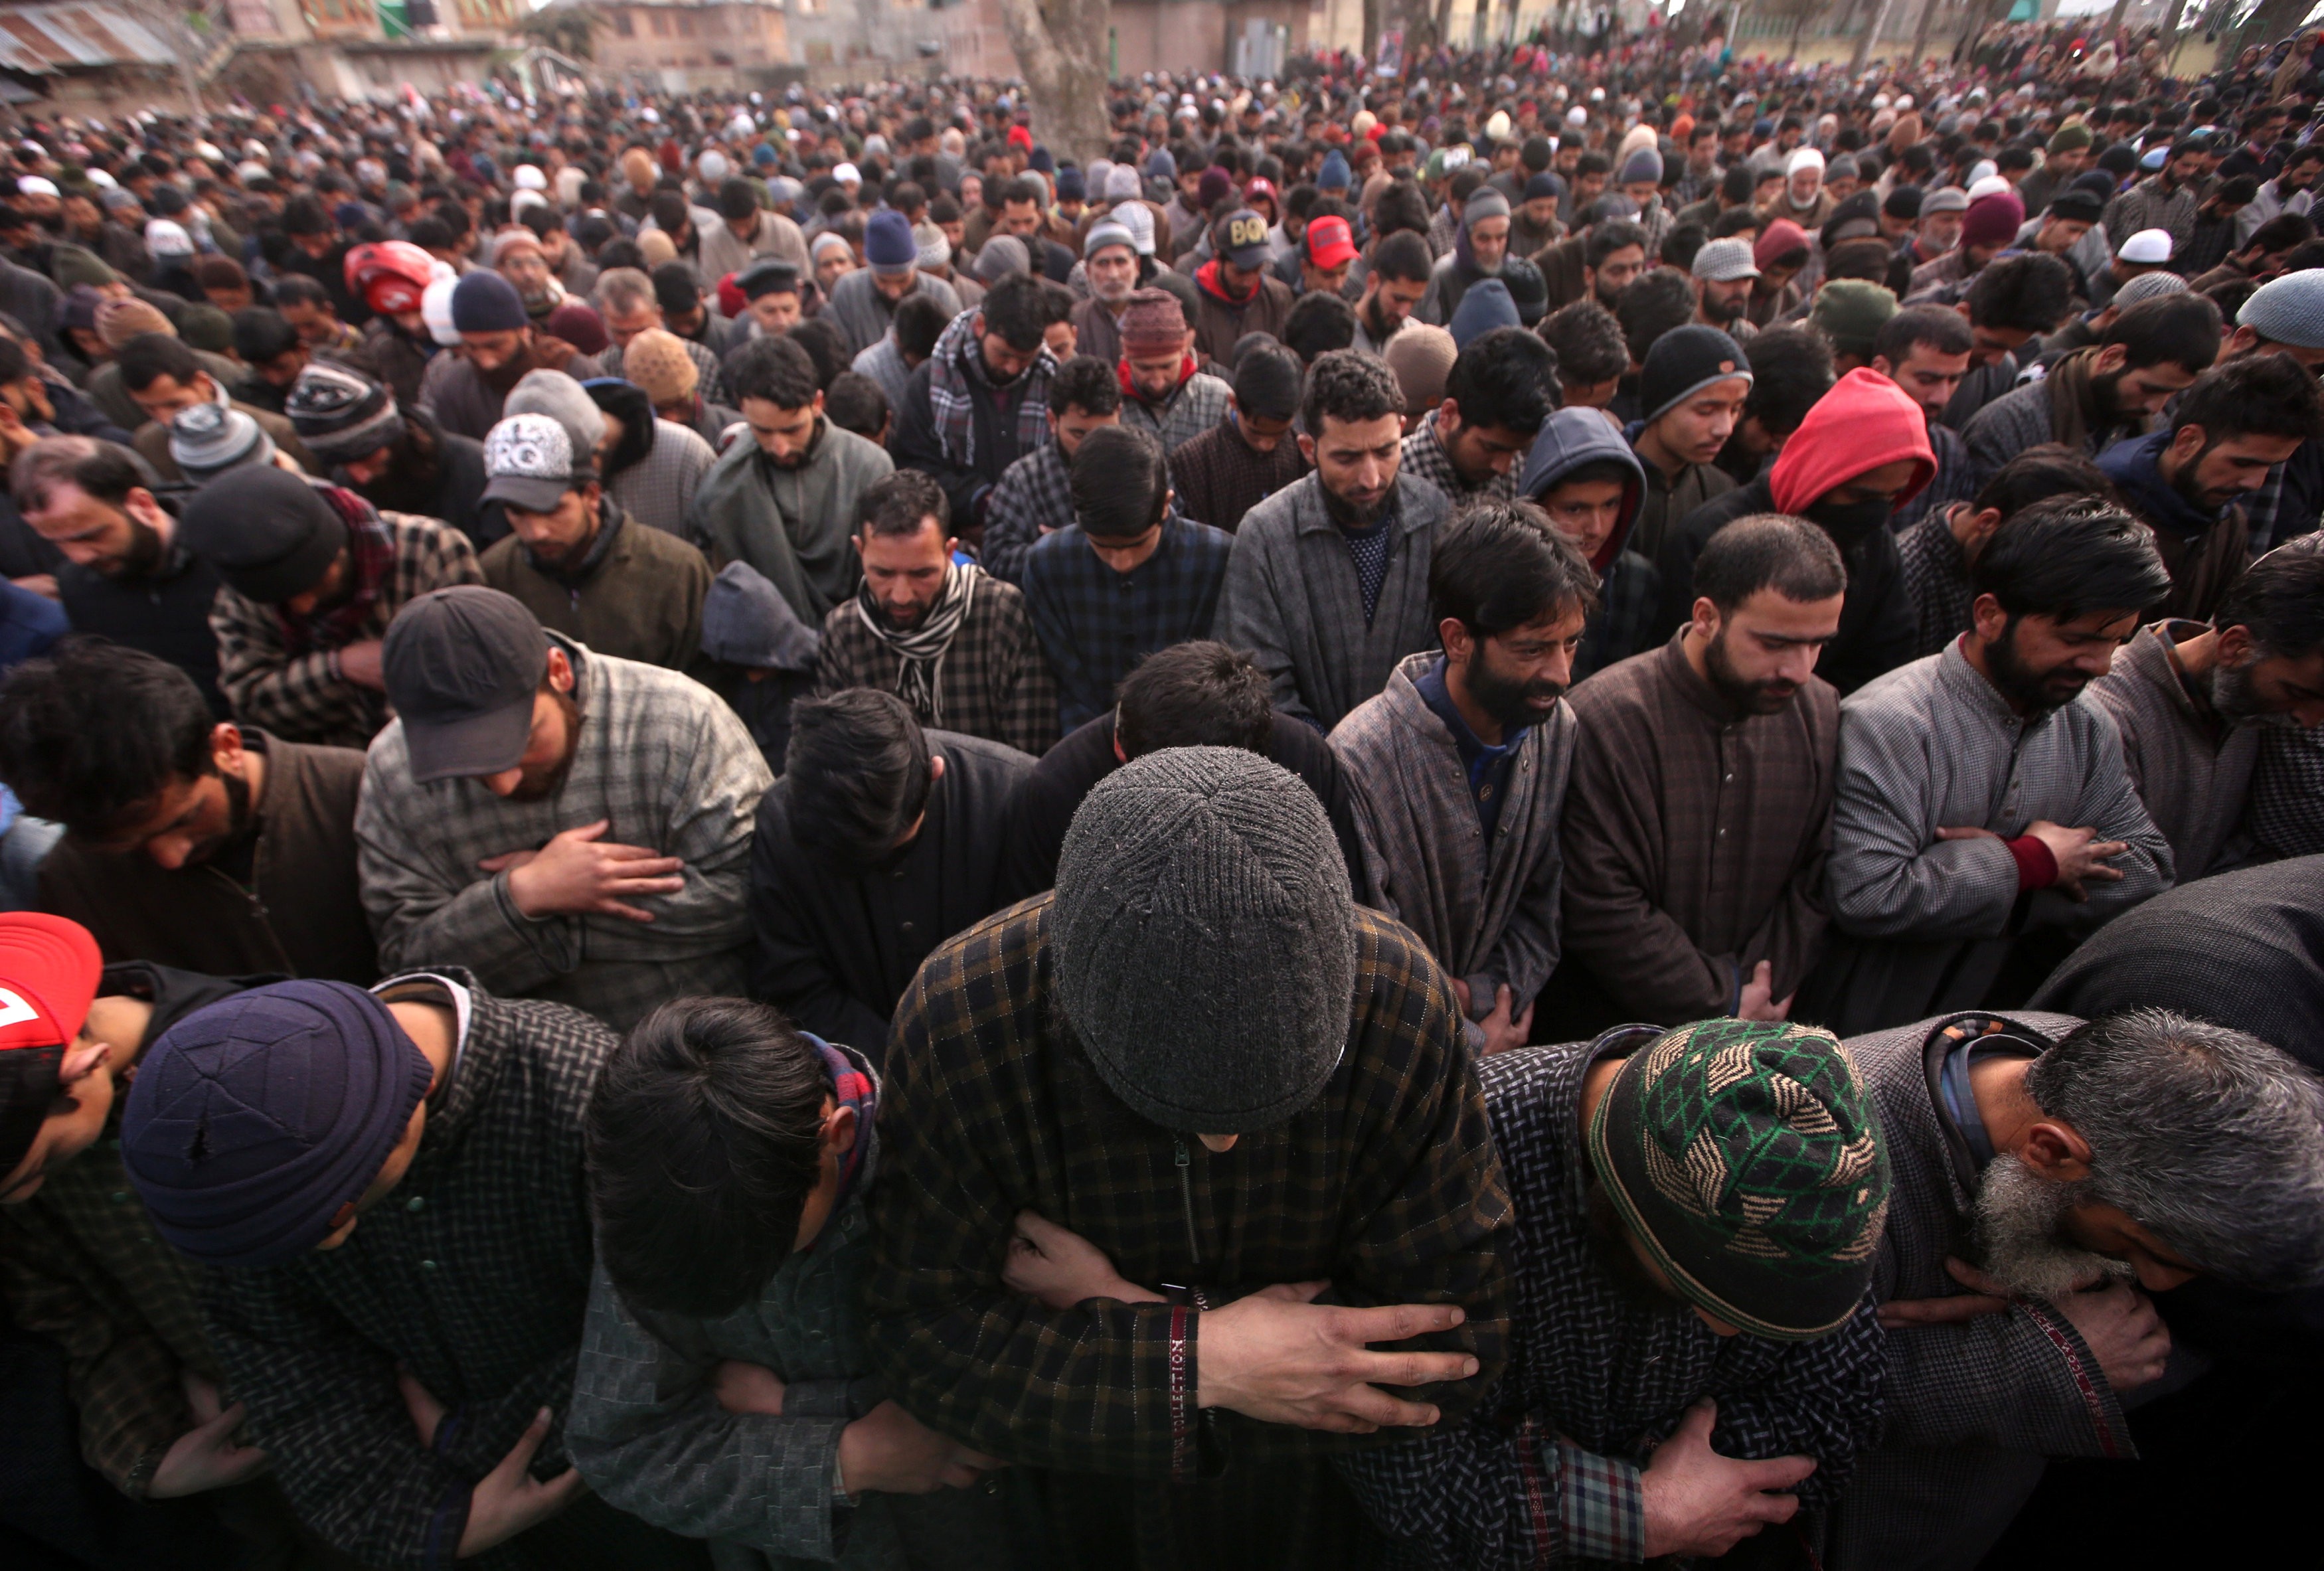 Kashmir is a predominantly Muslim region with close ties to Pakistan and the rest of the Islamic world. Photo: Reuters